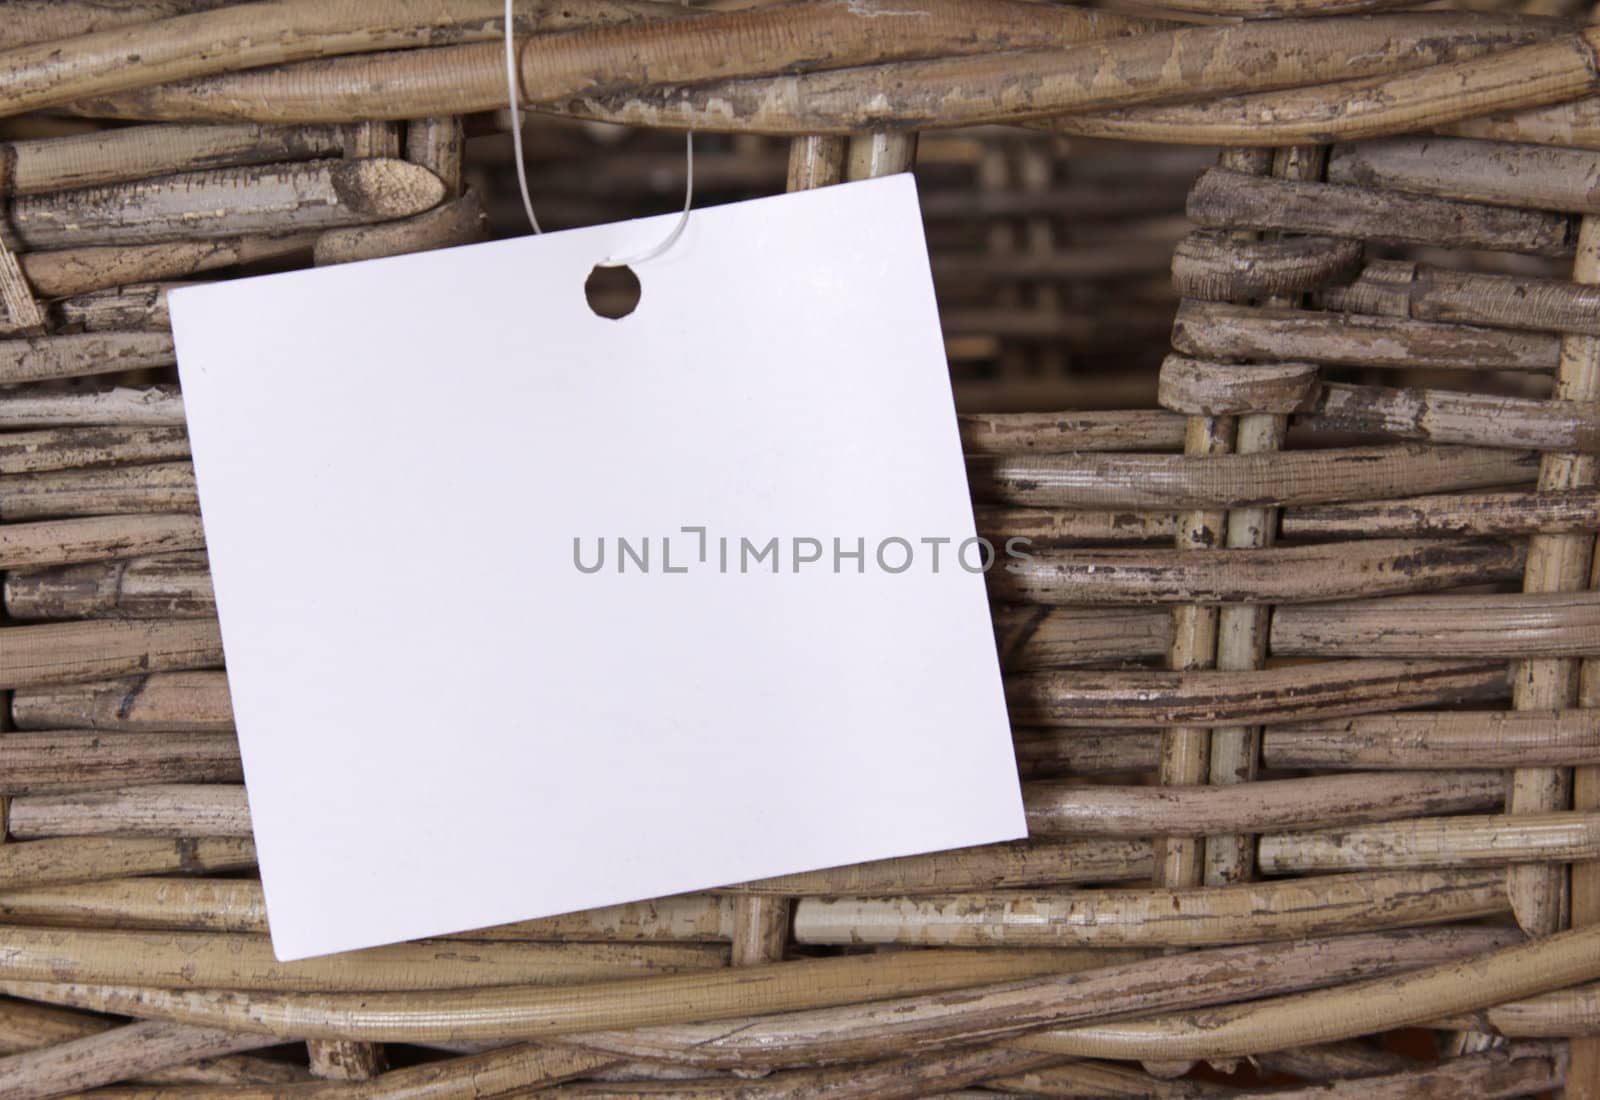 A wicker basket with a white label attached to it.